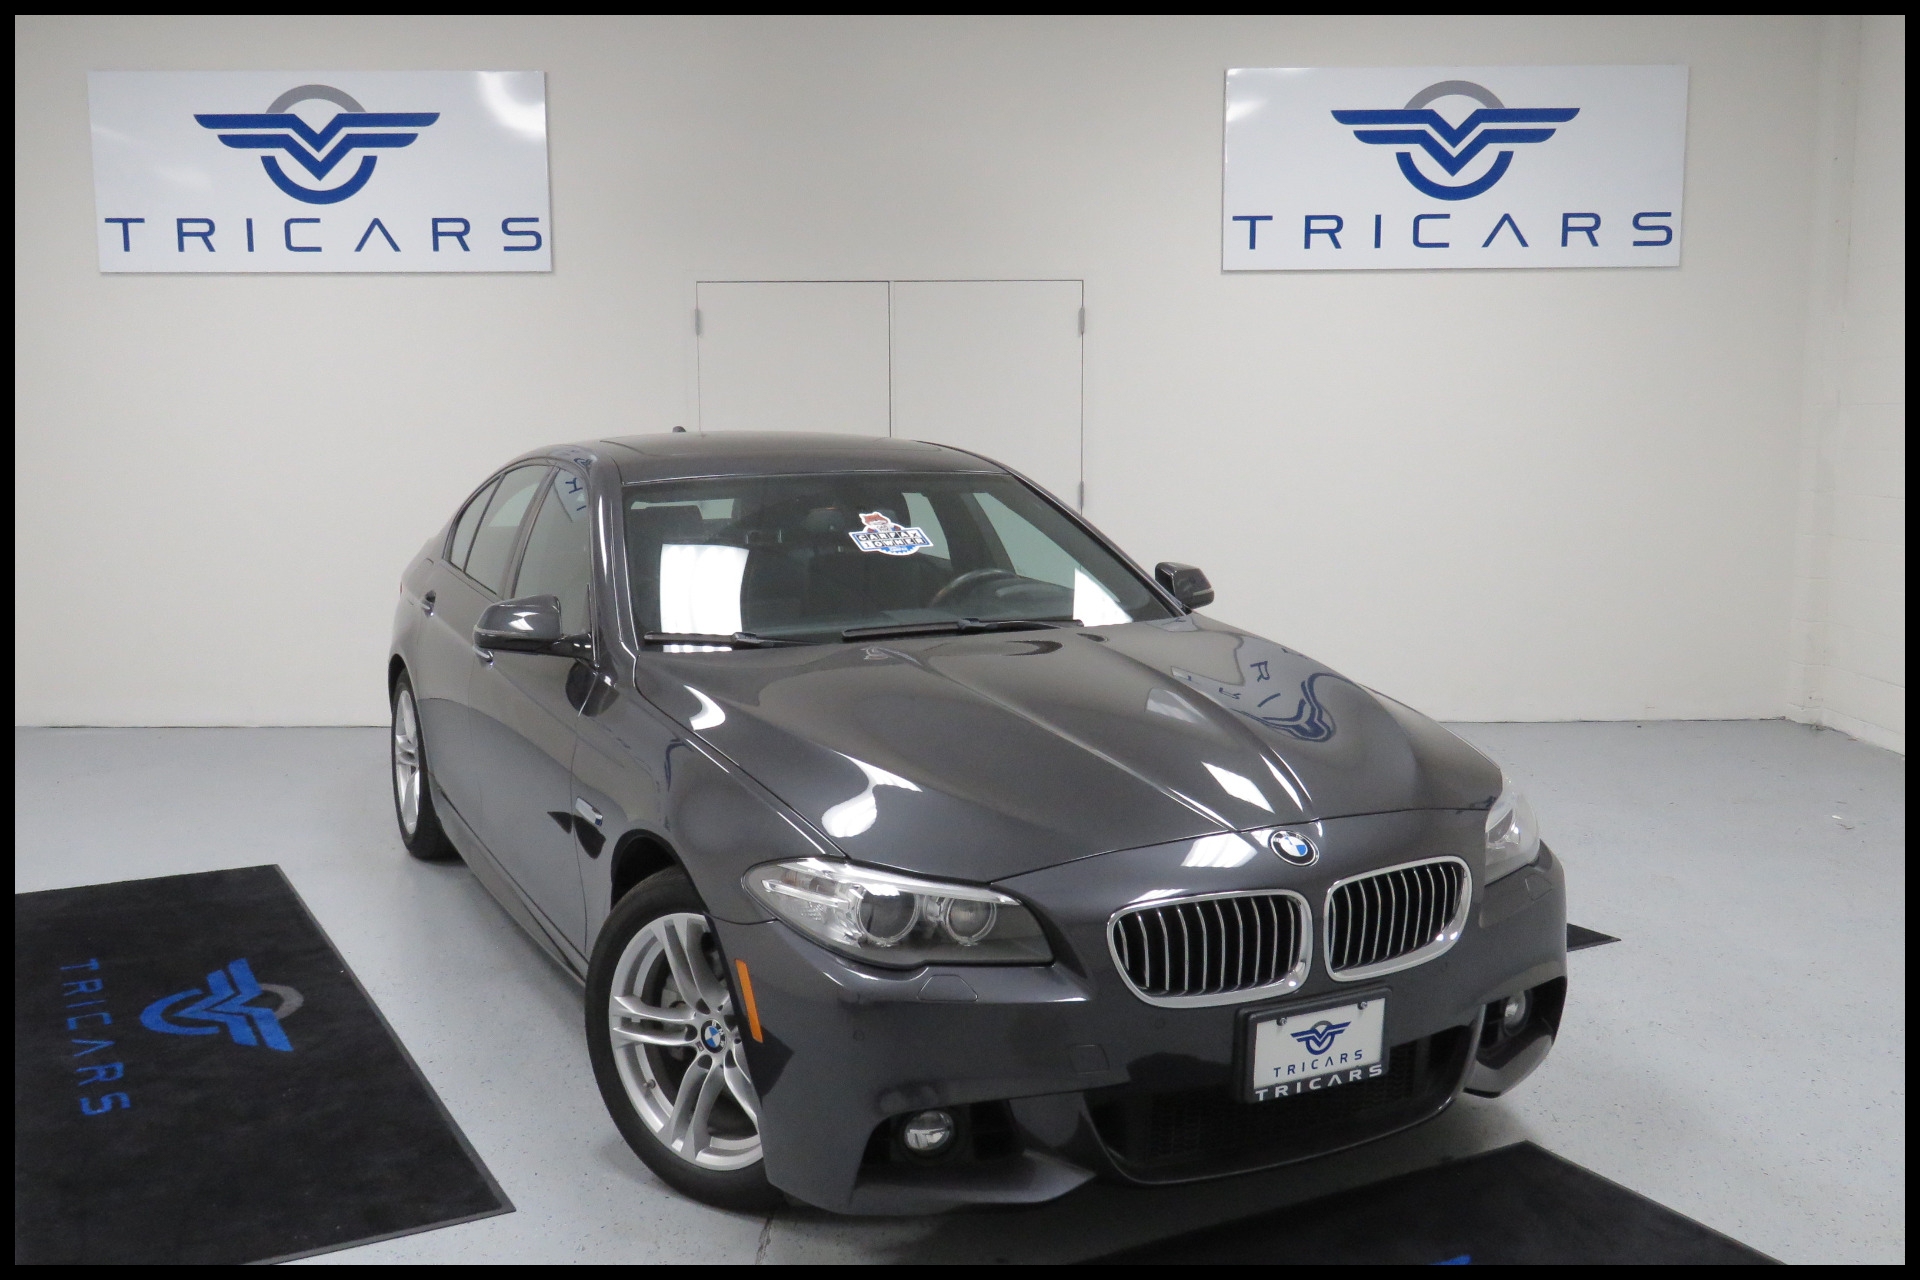 Bmw Dealers In Md 2014 Bmw 5 Series 528i Xdrive M Sport Stock for Sale Near